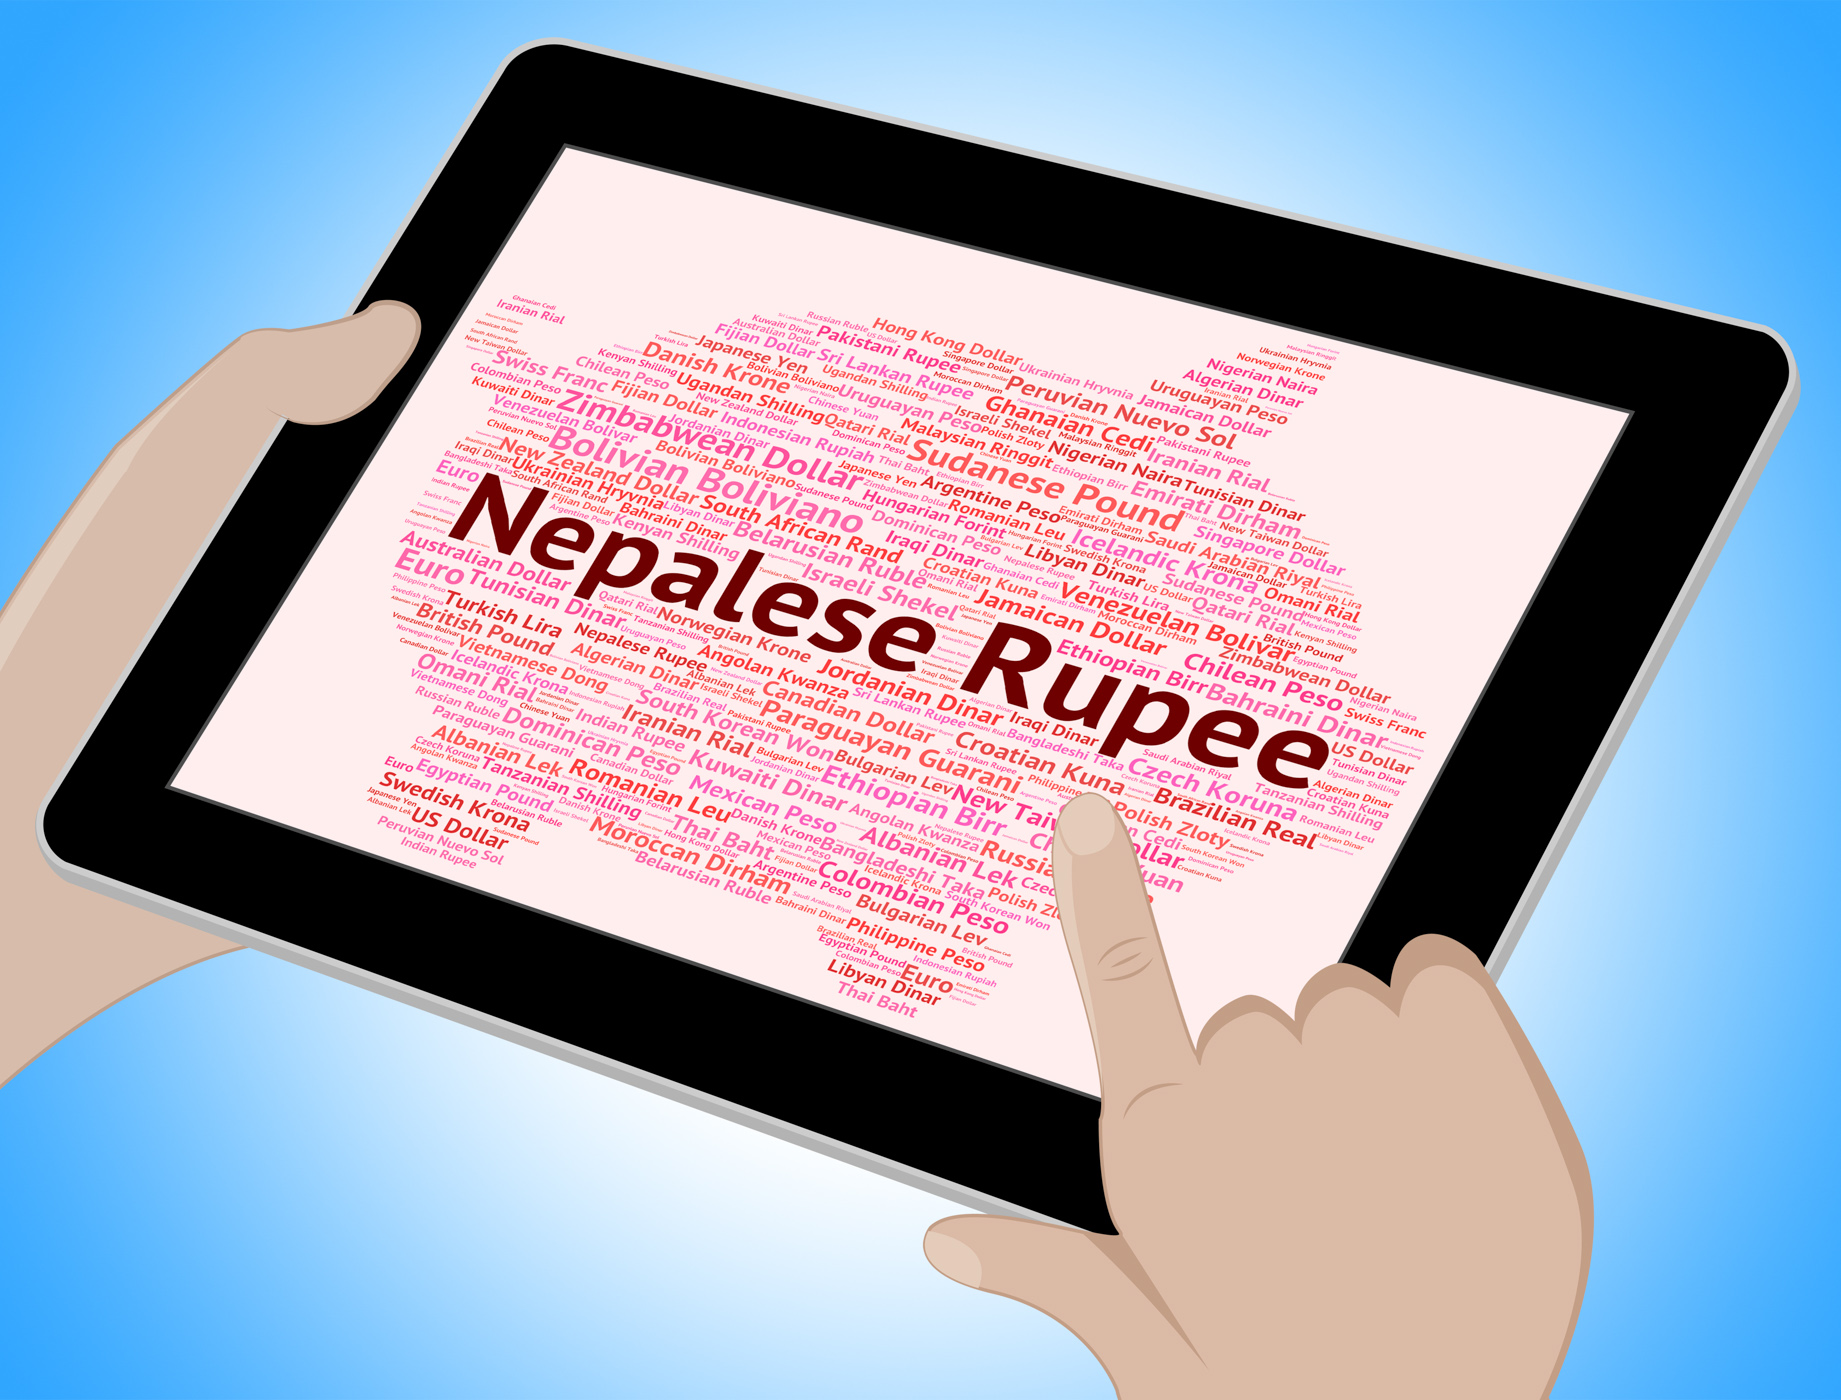 Nepalese rupee represents currency exchange and coinage photo